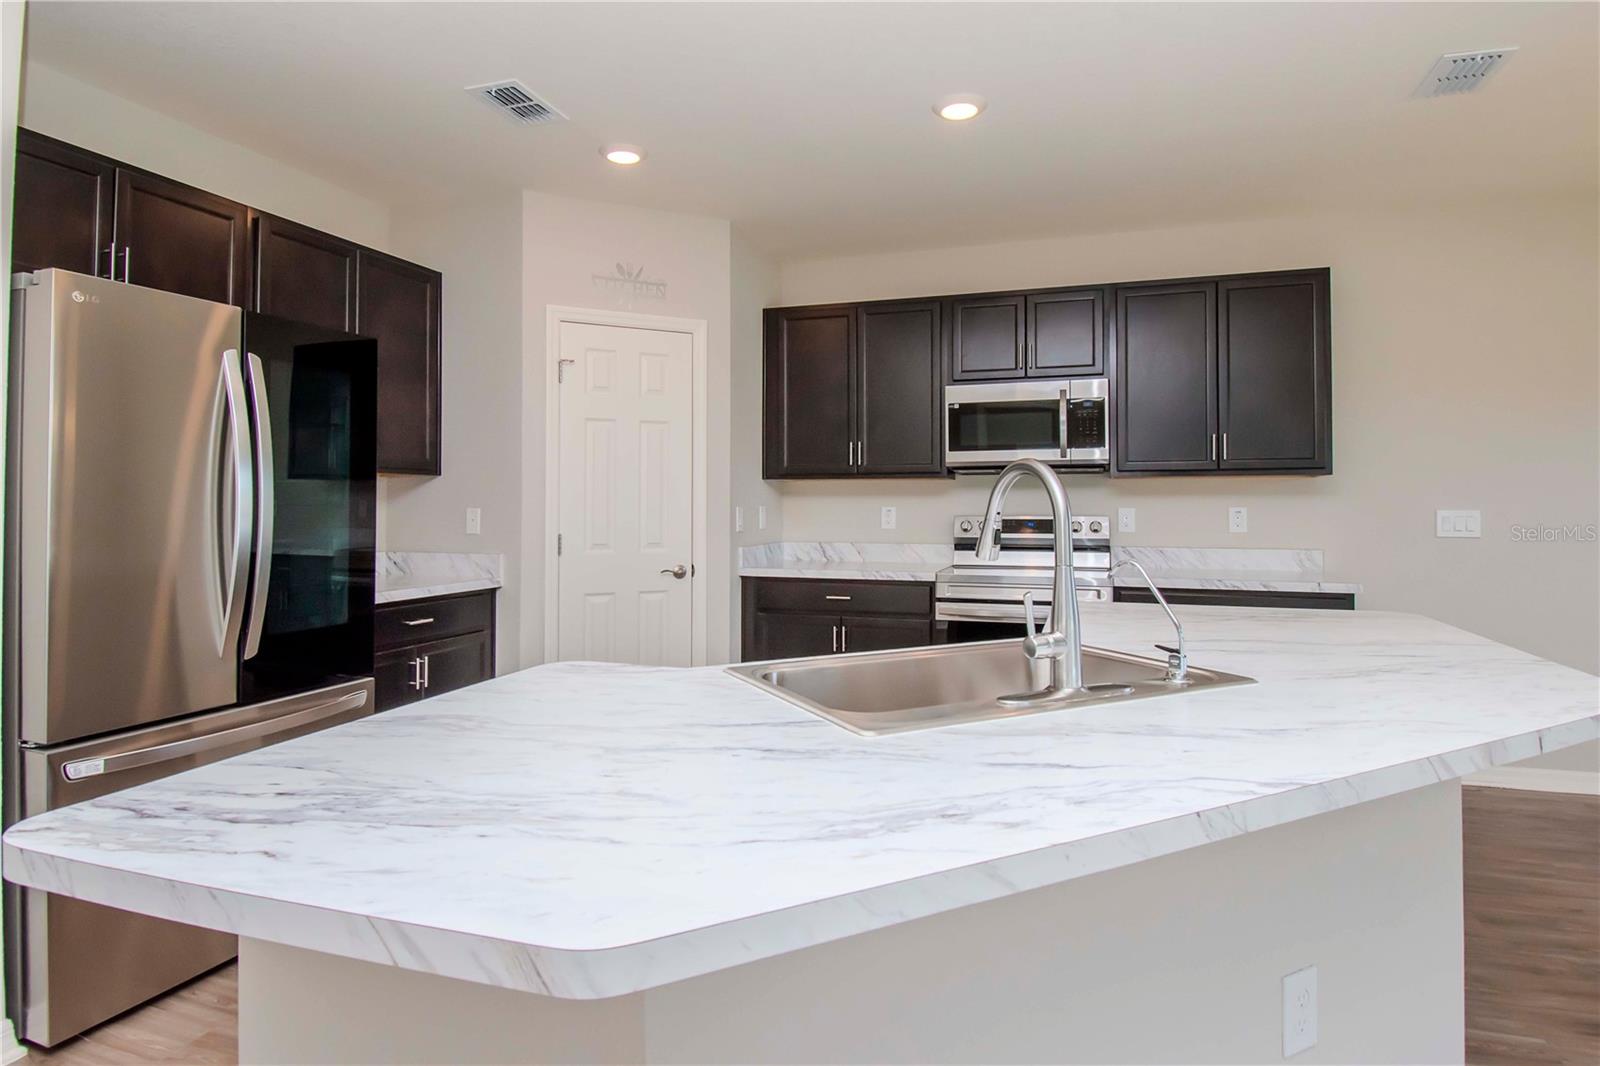 FULLY EQUIPPED KITCHEN WITH BREAKFAST BAR, STAINLESS STEEL APPLIANCES, AND WALK-IN PANTRY